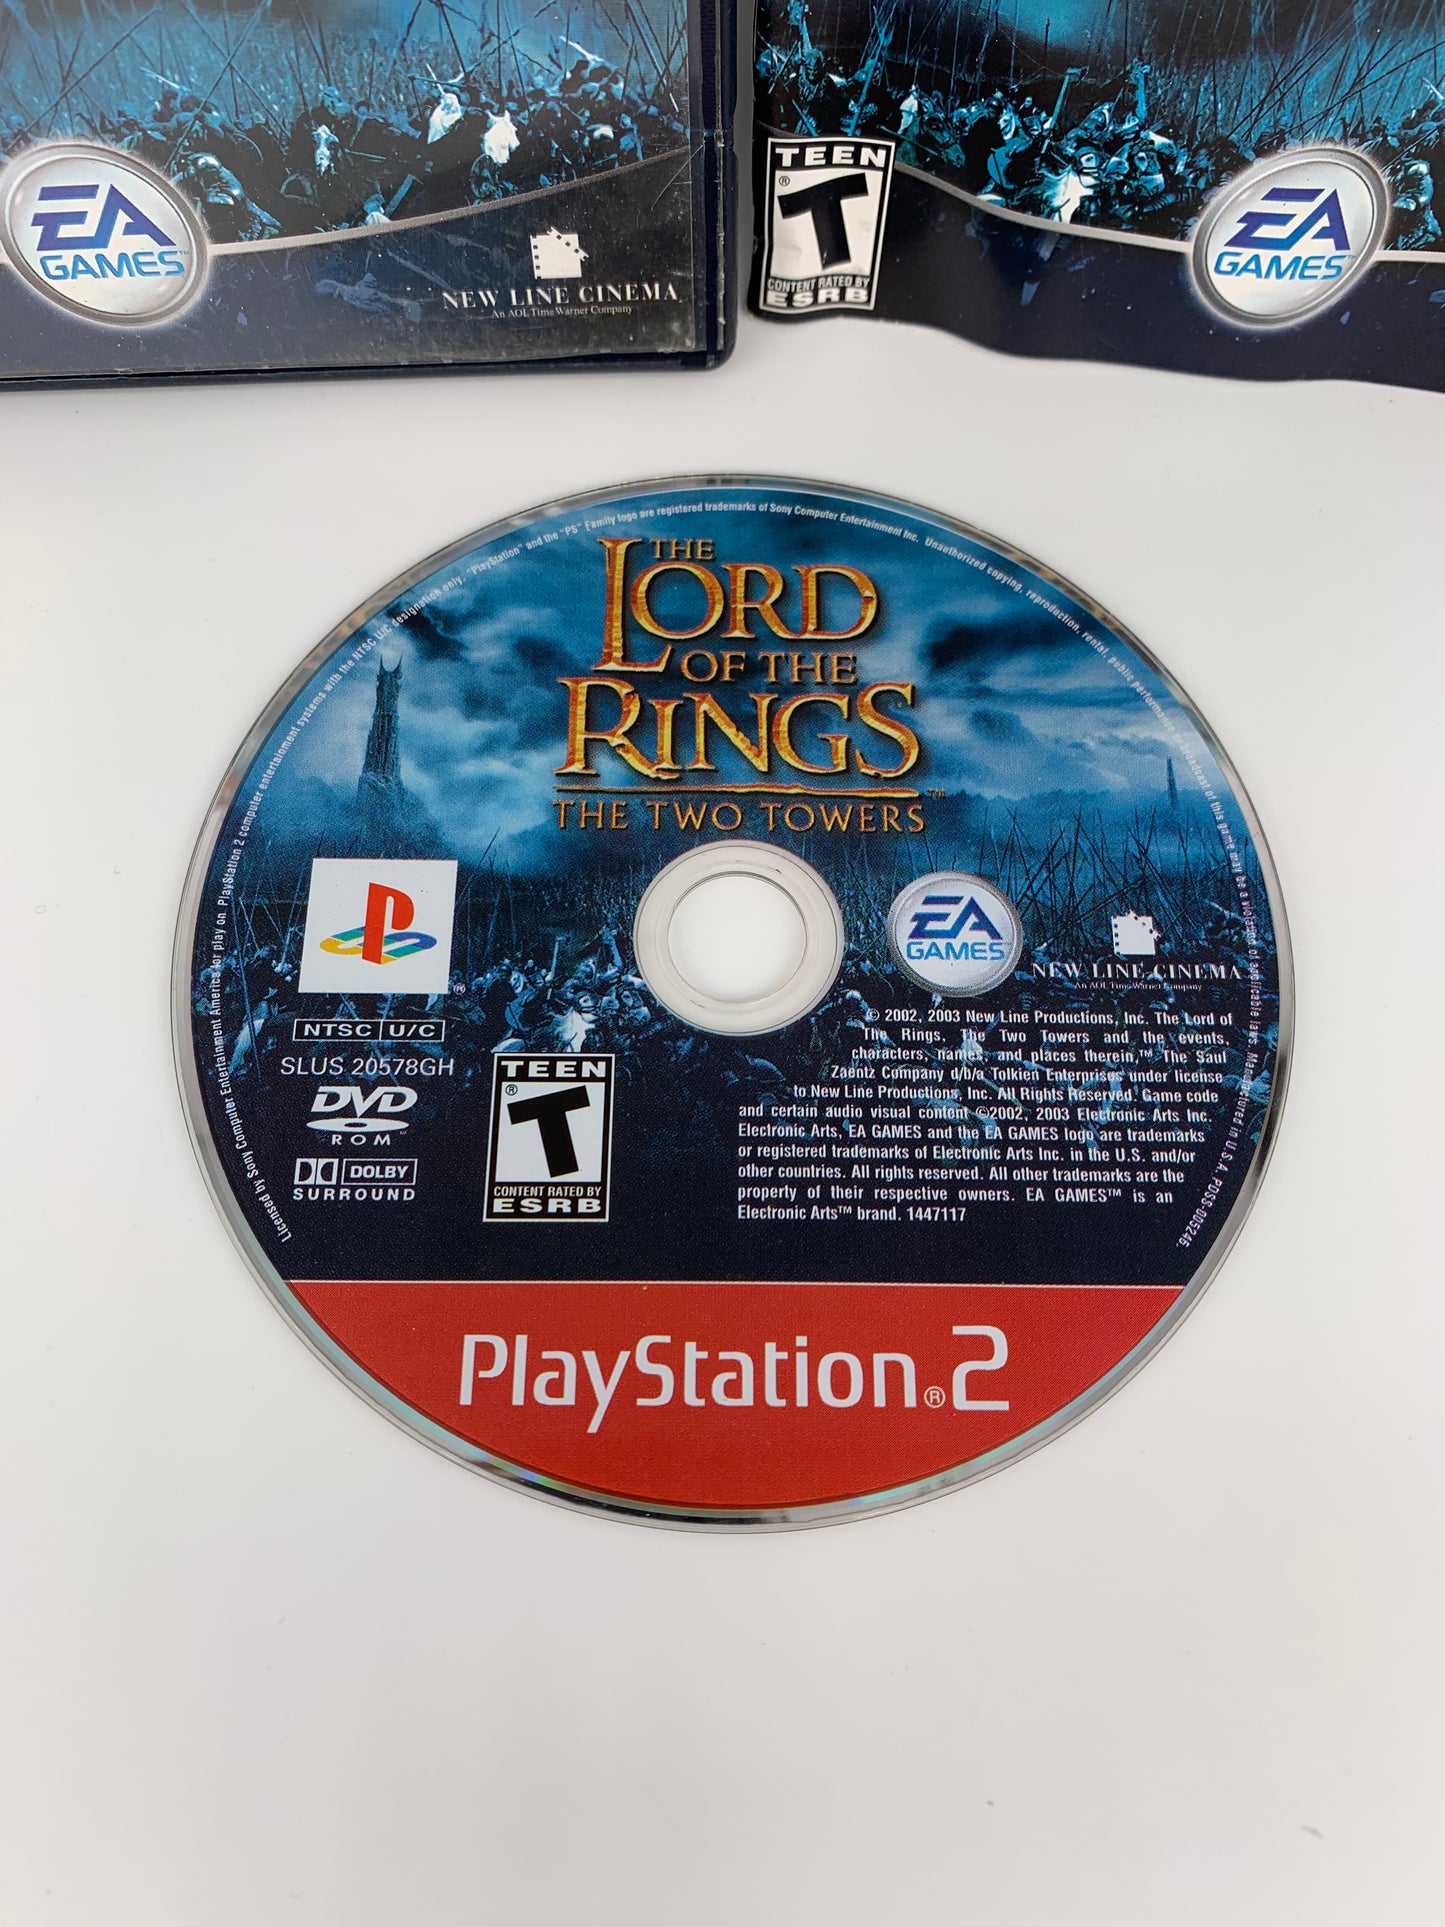 SONY PLAYSTATiON 2 [PS2] | THE LORD OF THE RiNGS THE TWO TOWERS | GREATEST HiTS